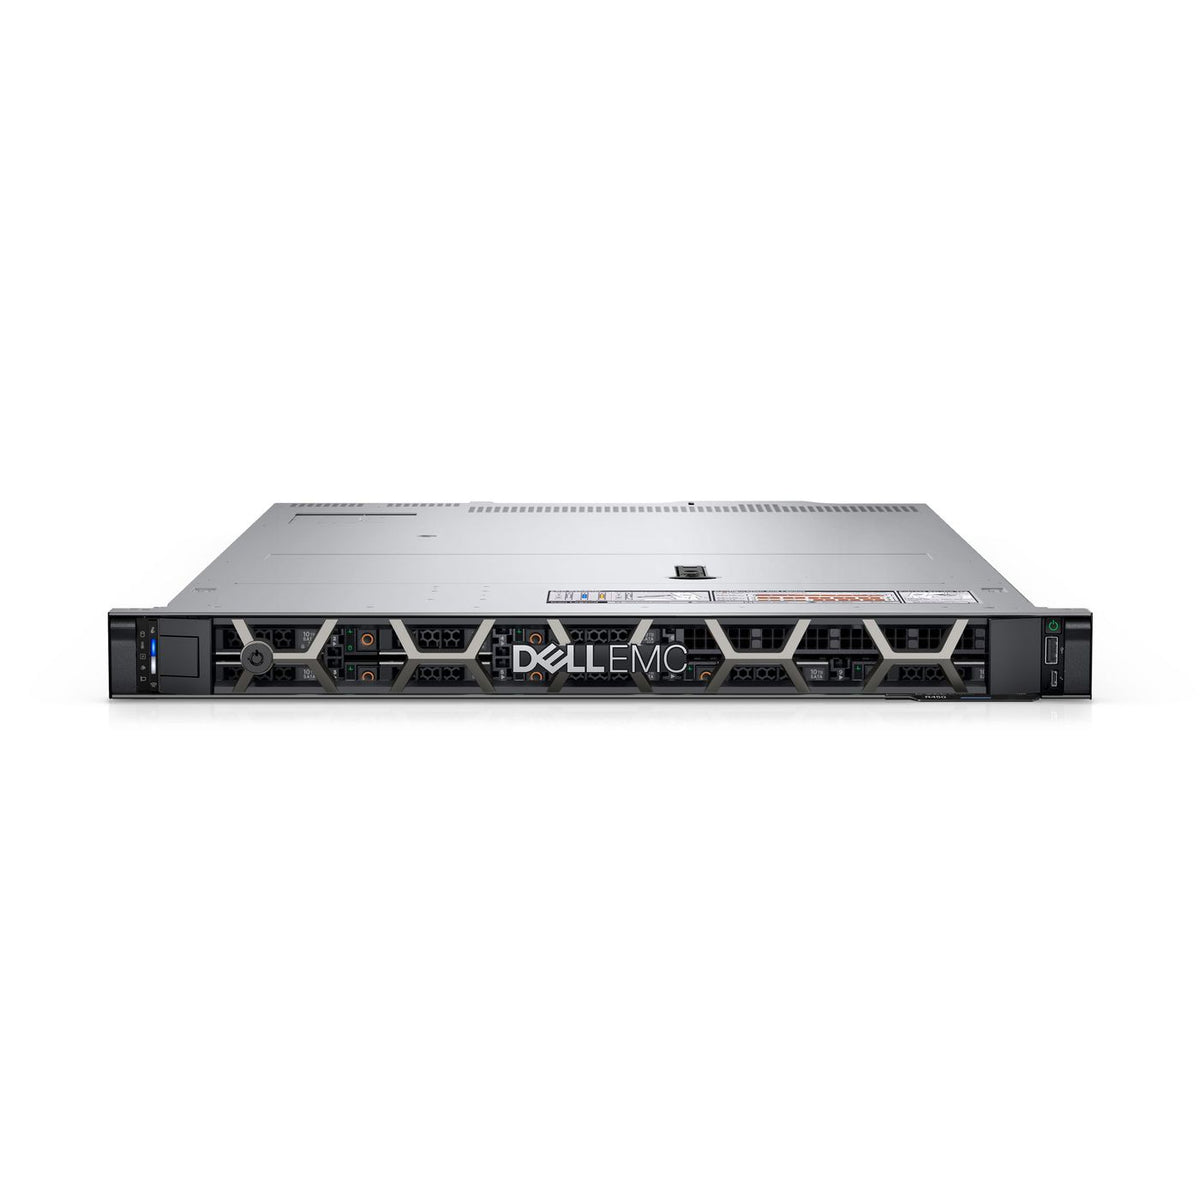 DELL R450 XEON 4314 SYST